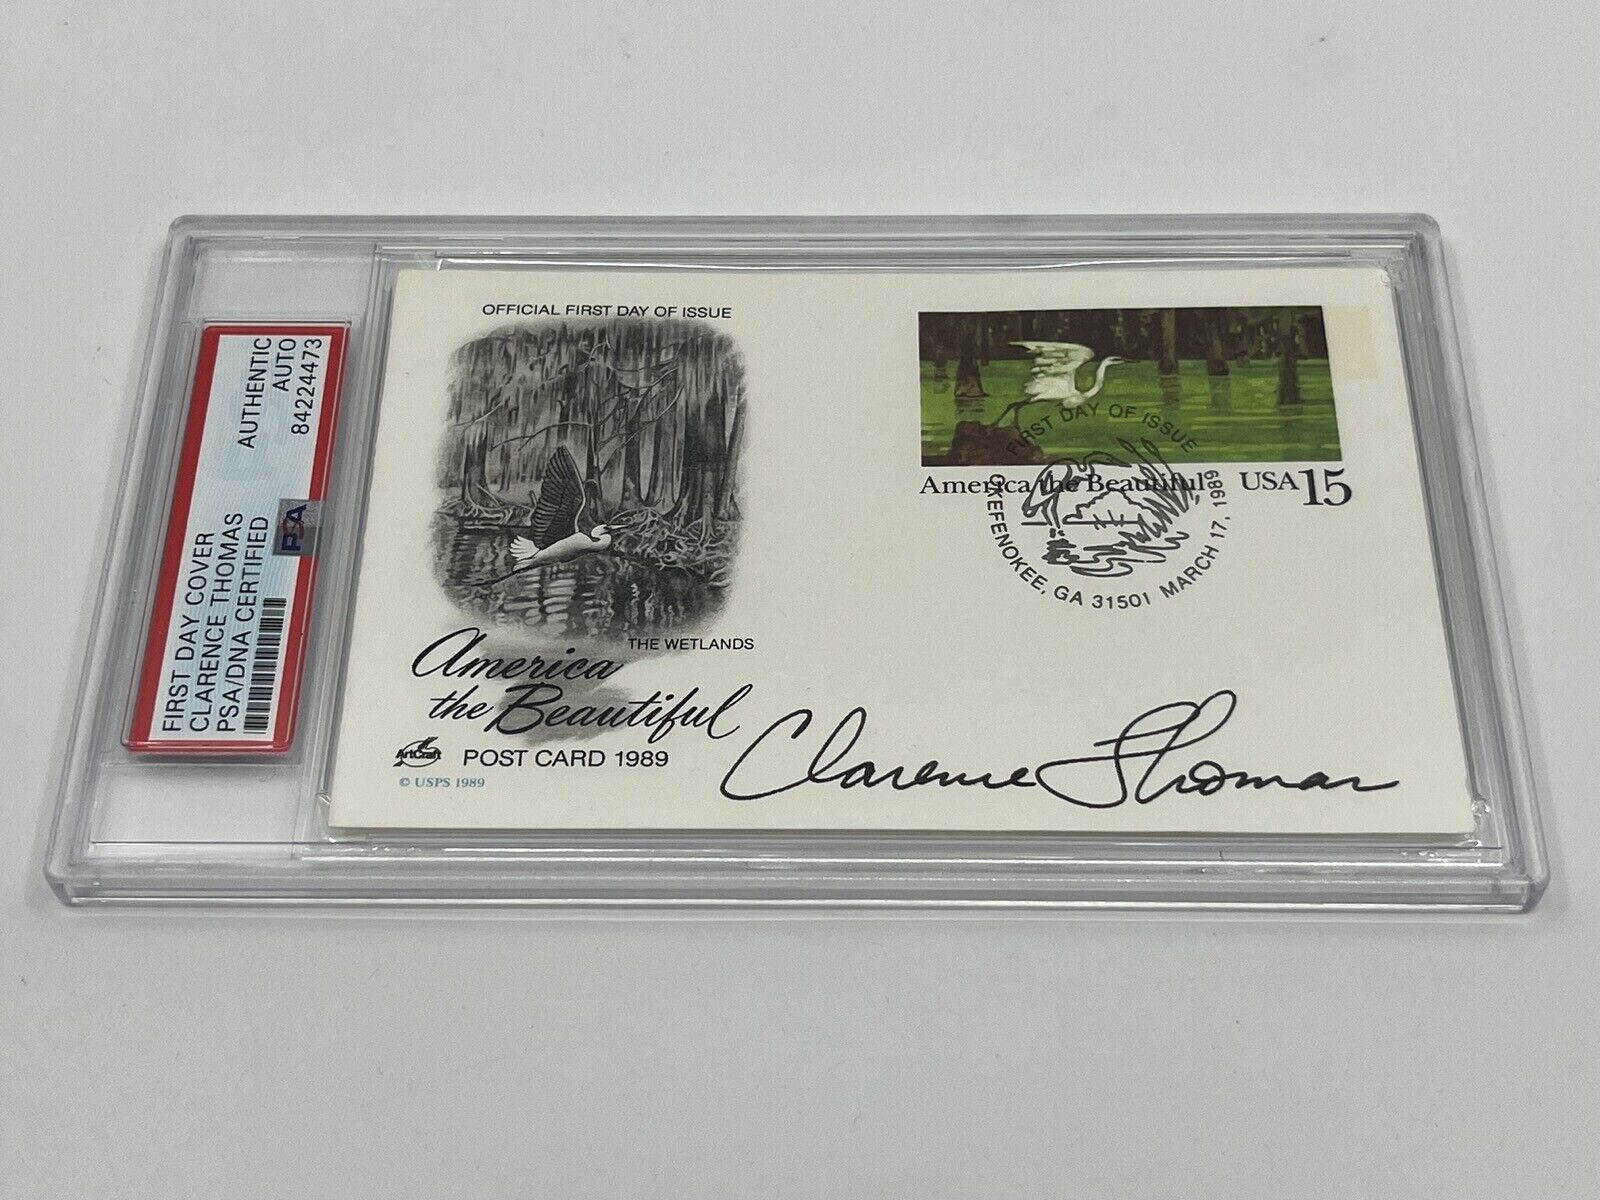 Clarence Thomas Supreme Court Signed Autograph First Day Cover PSA DNA j2f1c *73